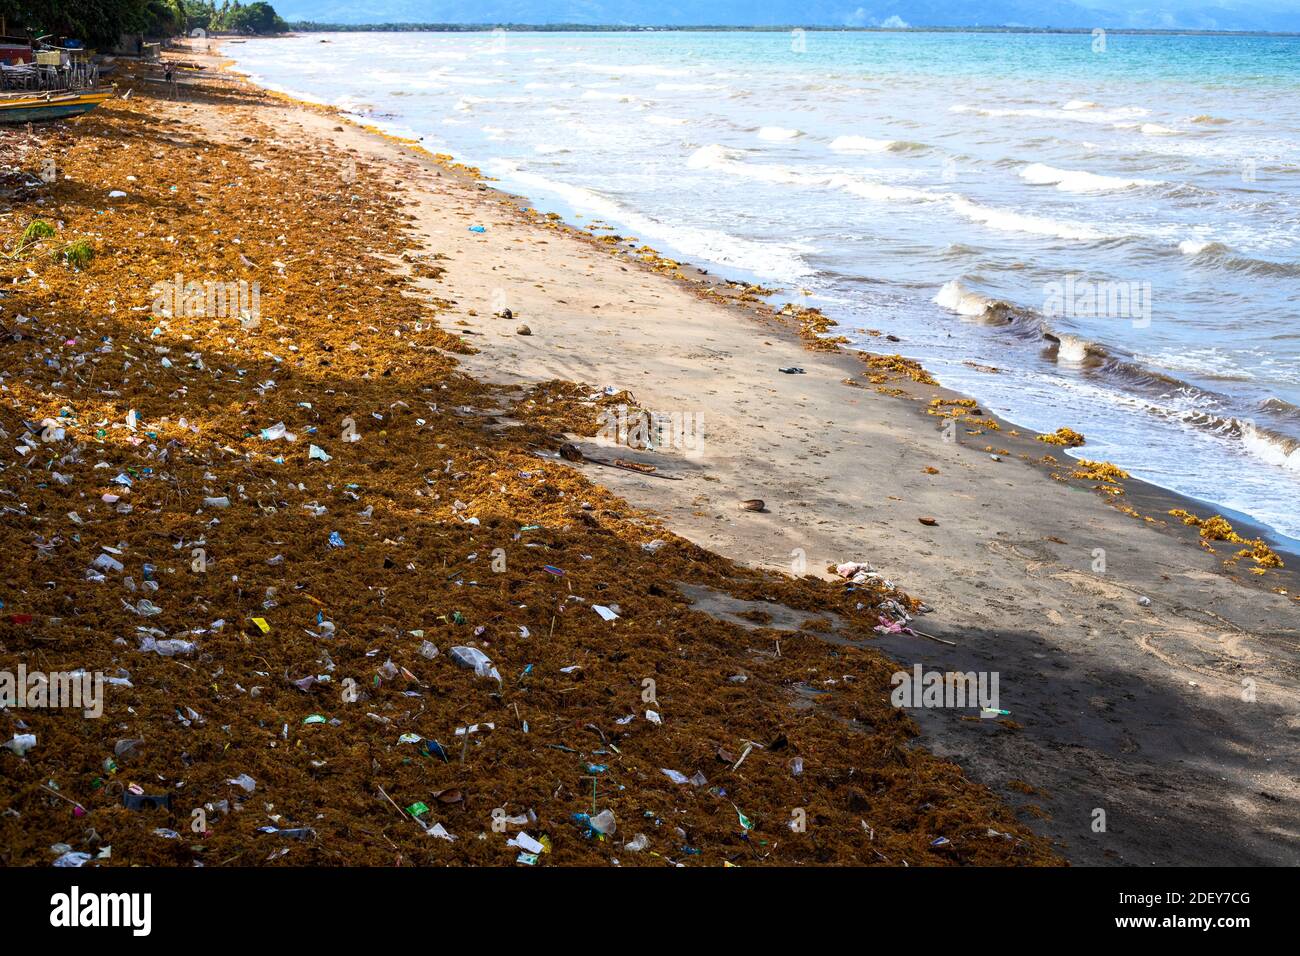 Sea water with waves, seaweed and garbage. Aquatic trash on tropical beach. Plastic pollution in ocean. Environmental problem of human impact on natur Stock Photo